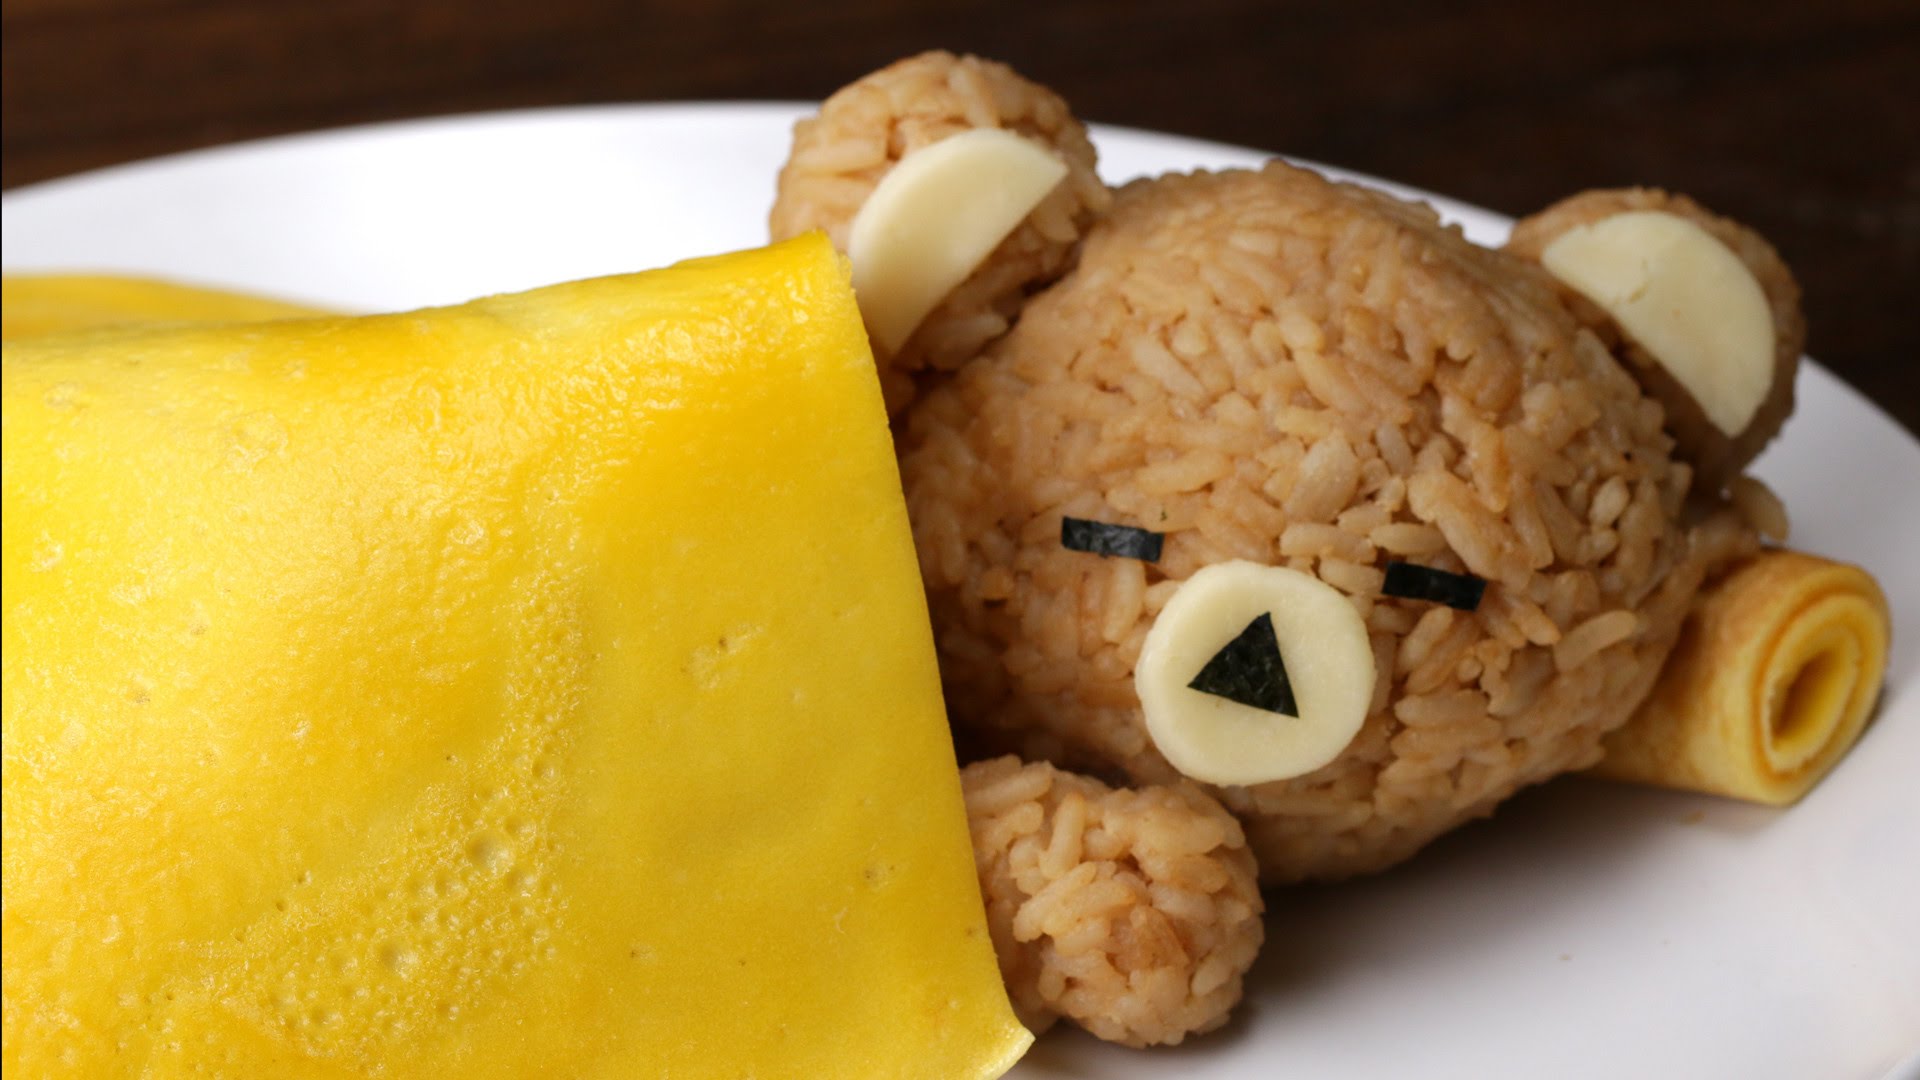 This Sleeping Rice Bear With An Egg Blanket Is Almost Too Cute To